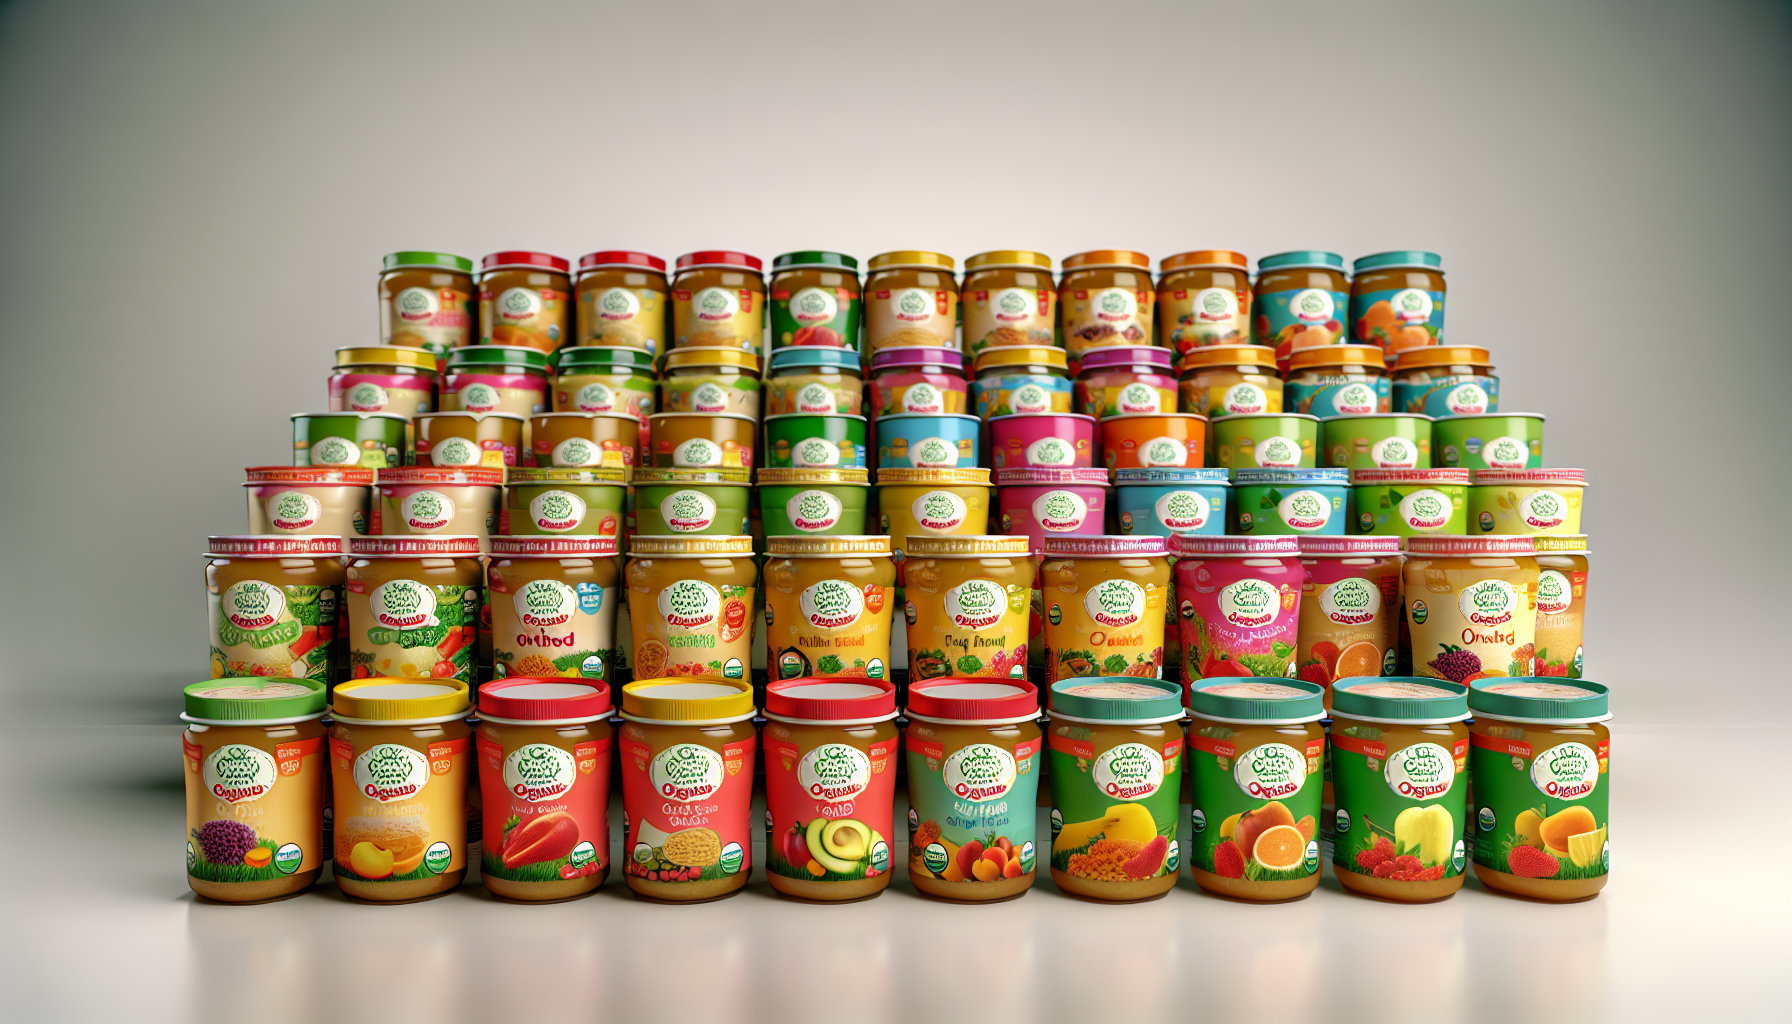 Assortment of organic baby food jars and pouches